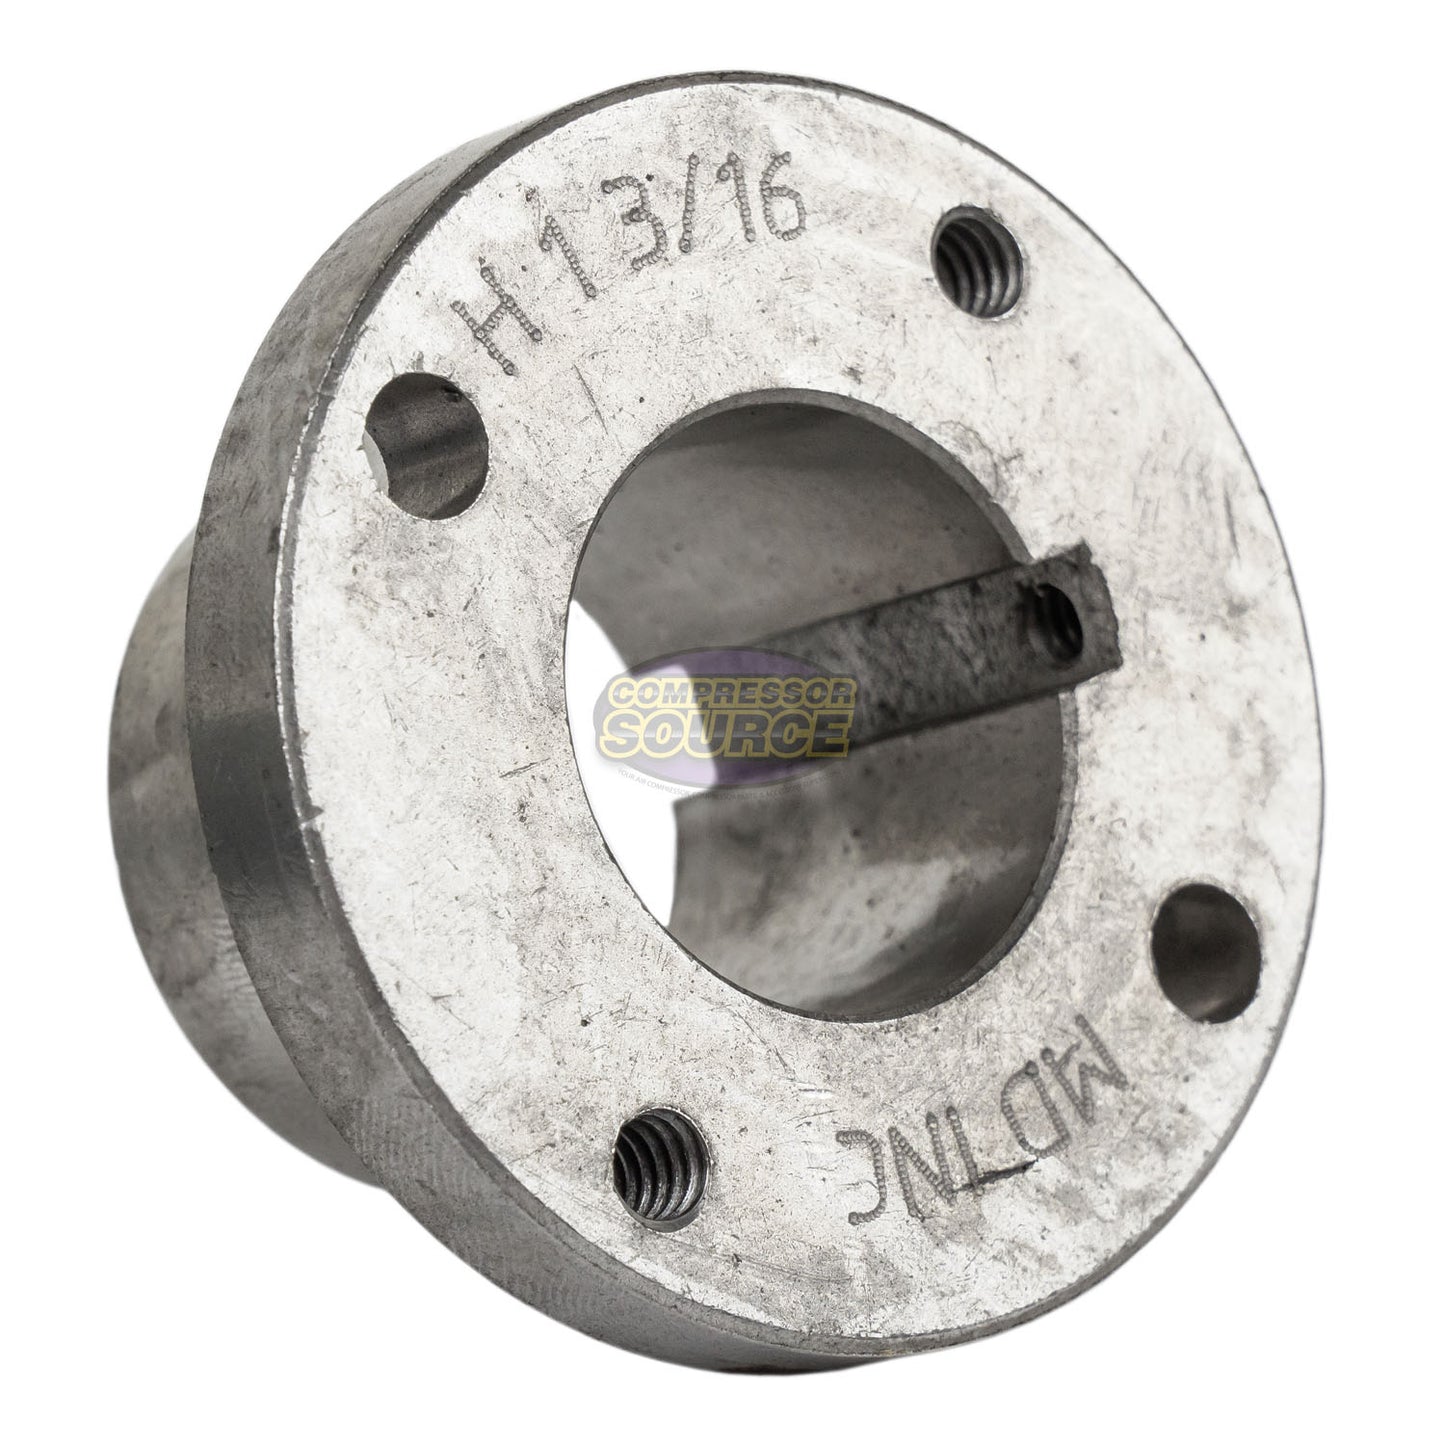 Cast Iron 4" Dual Groove Belt A Section 4L Pulley w/ 1-3/16" Sheave Bushing